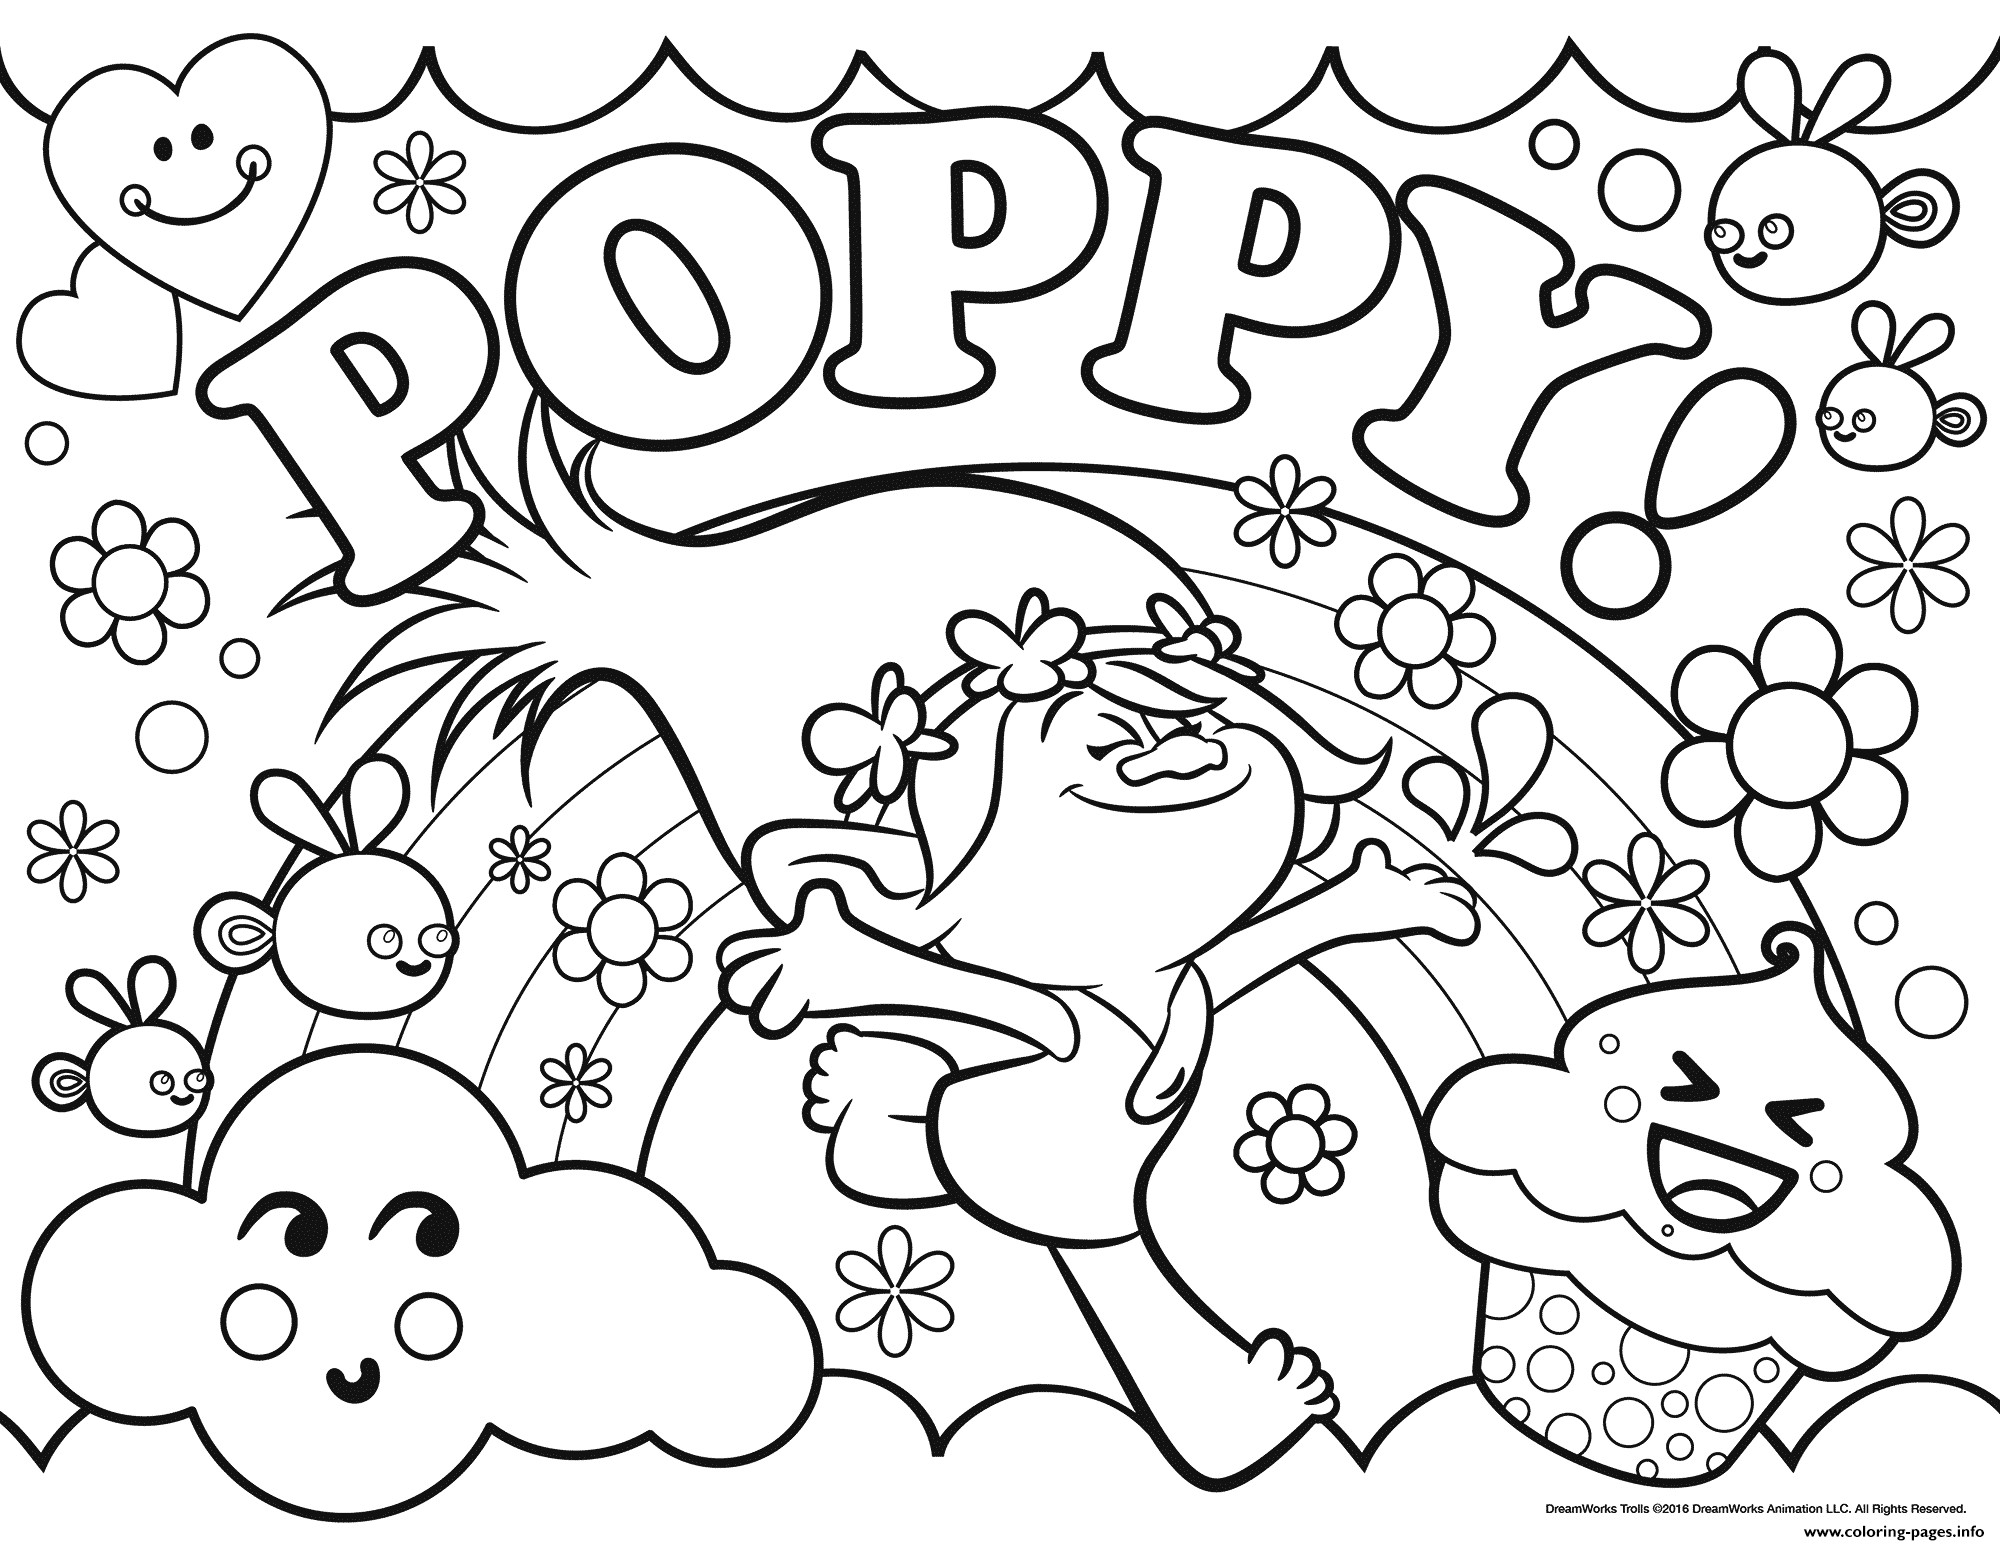 Trolls Clipart Coloring Pages Wallpaper